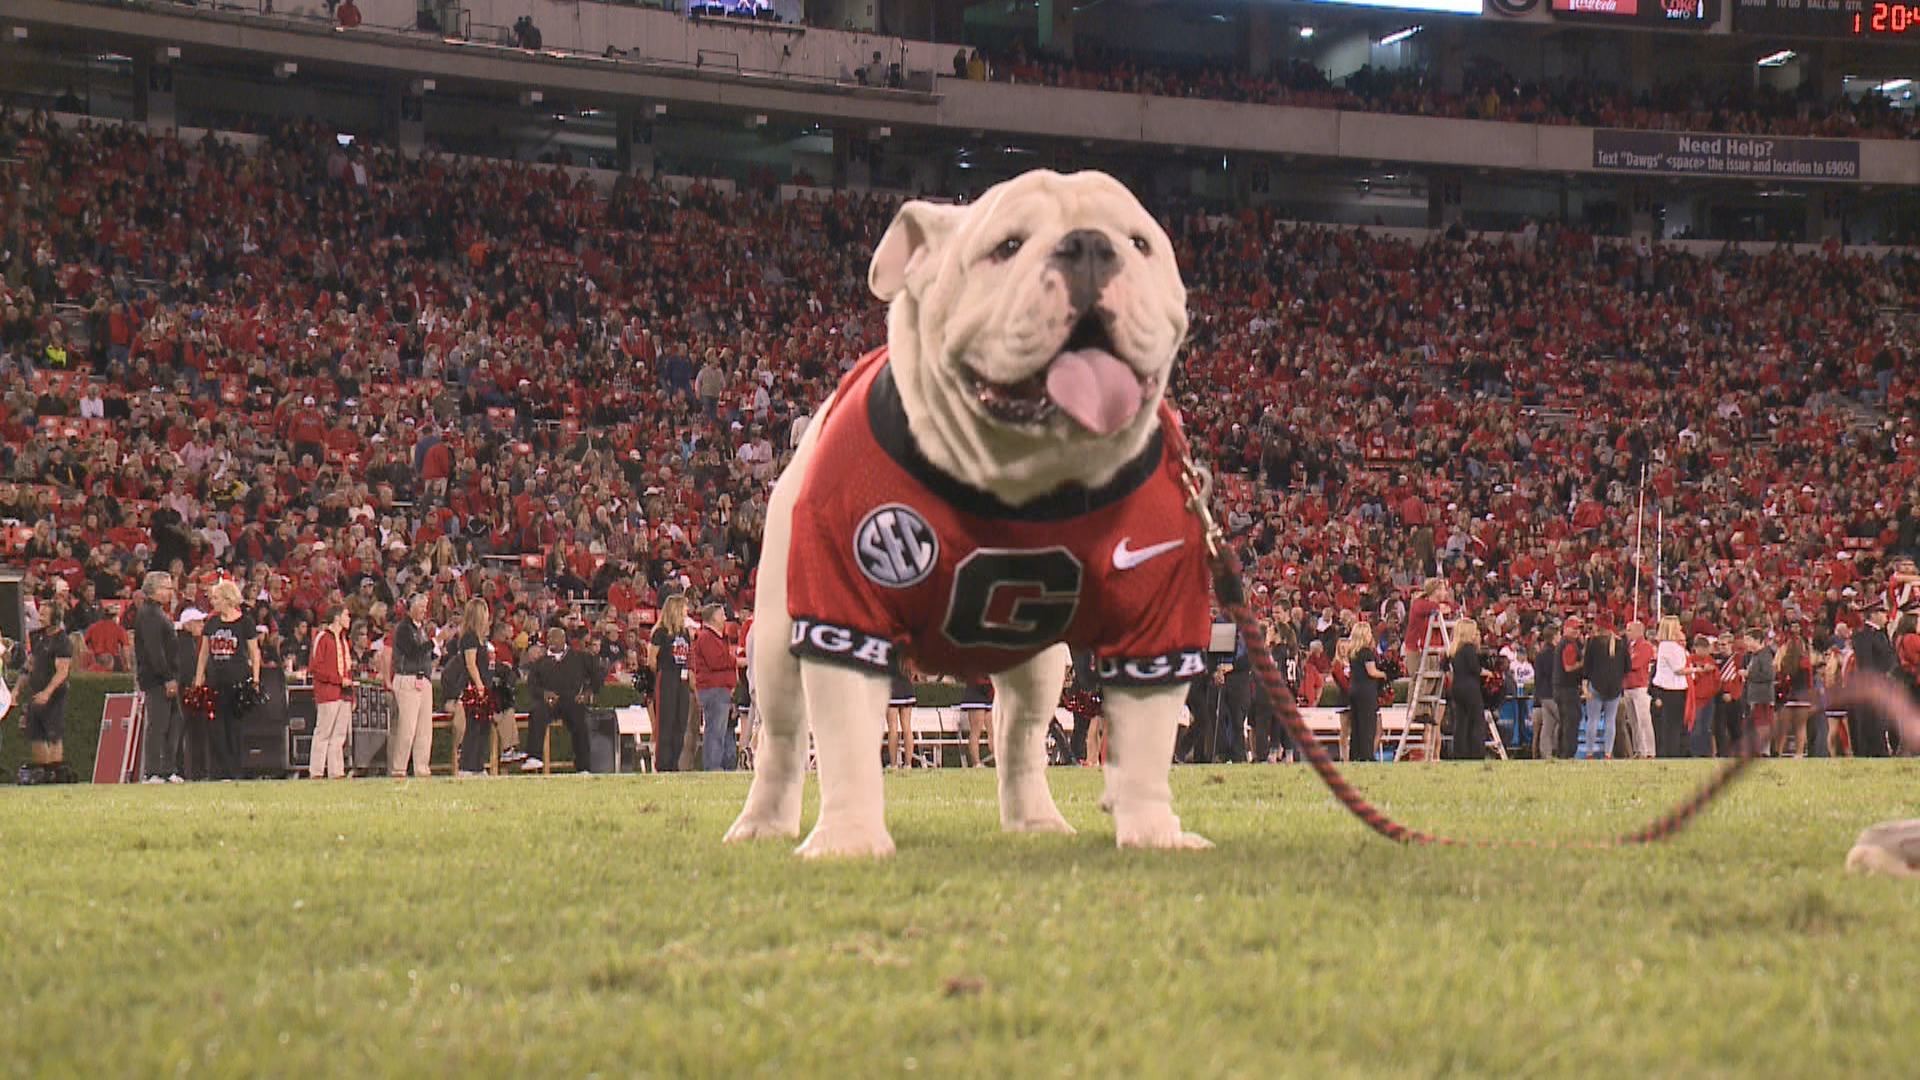 1920x1080 ... background photos; que to take over as uga x during the georgia  southern game ...